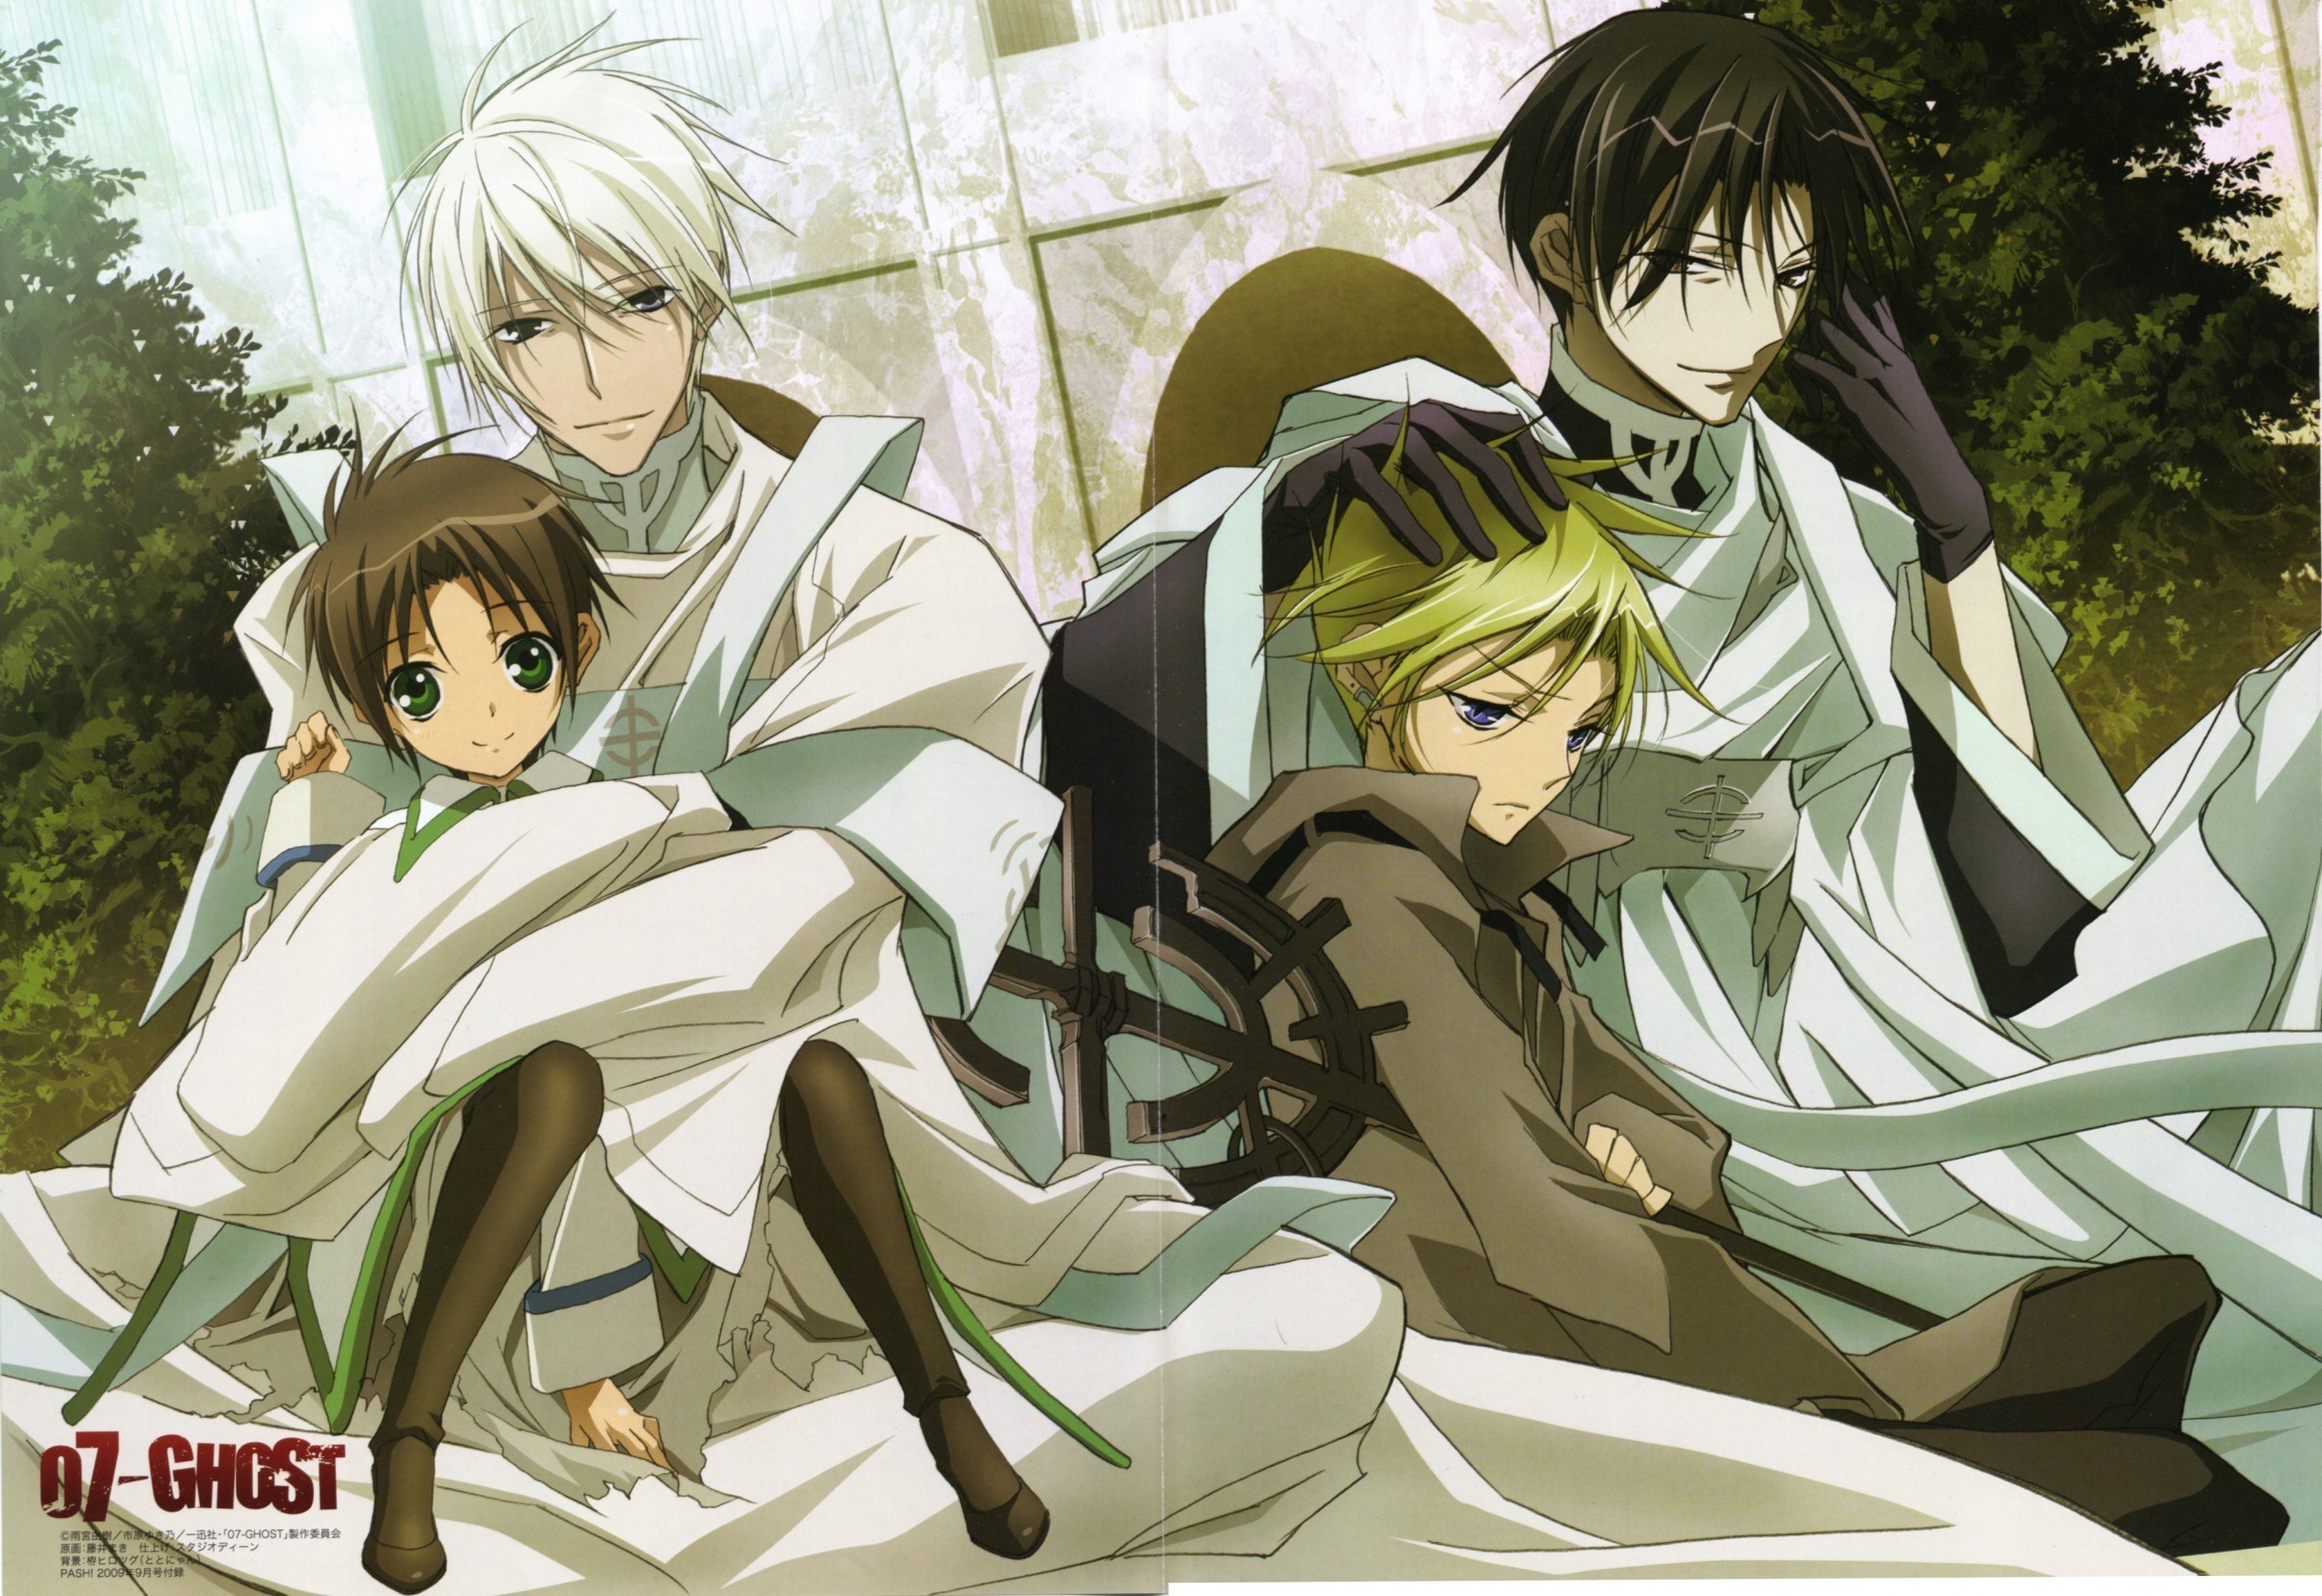 Fea with Teito and Bastian with Frau - 07 ghost Photo (13668017) - Fanpop